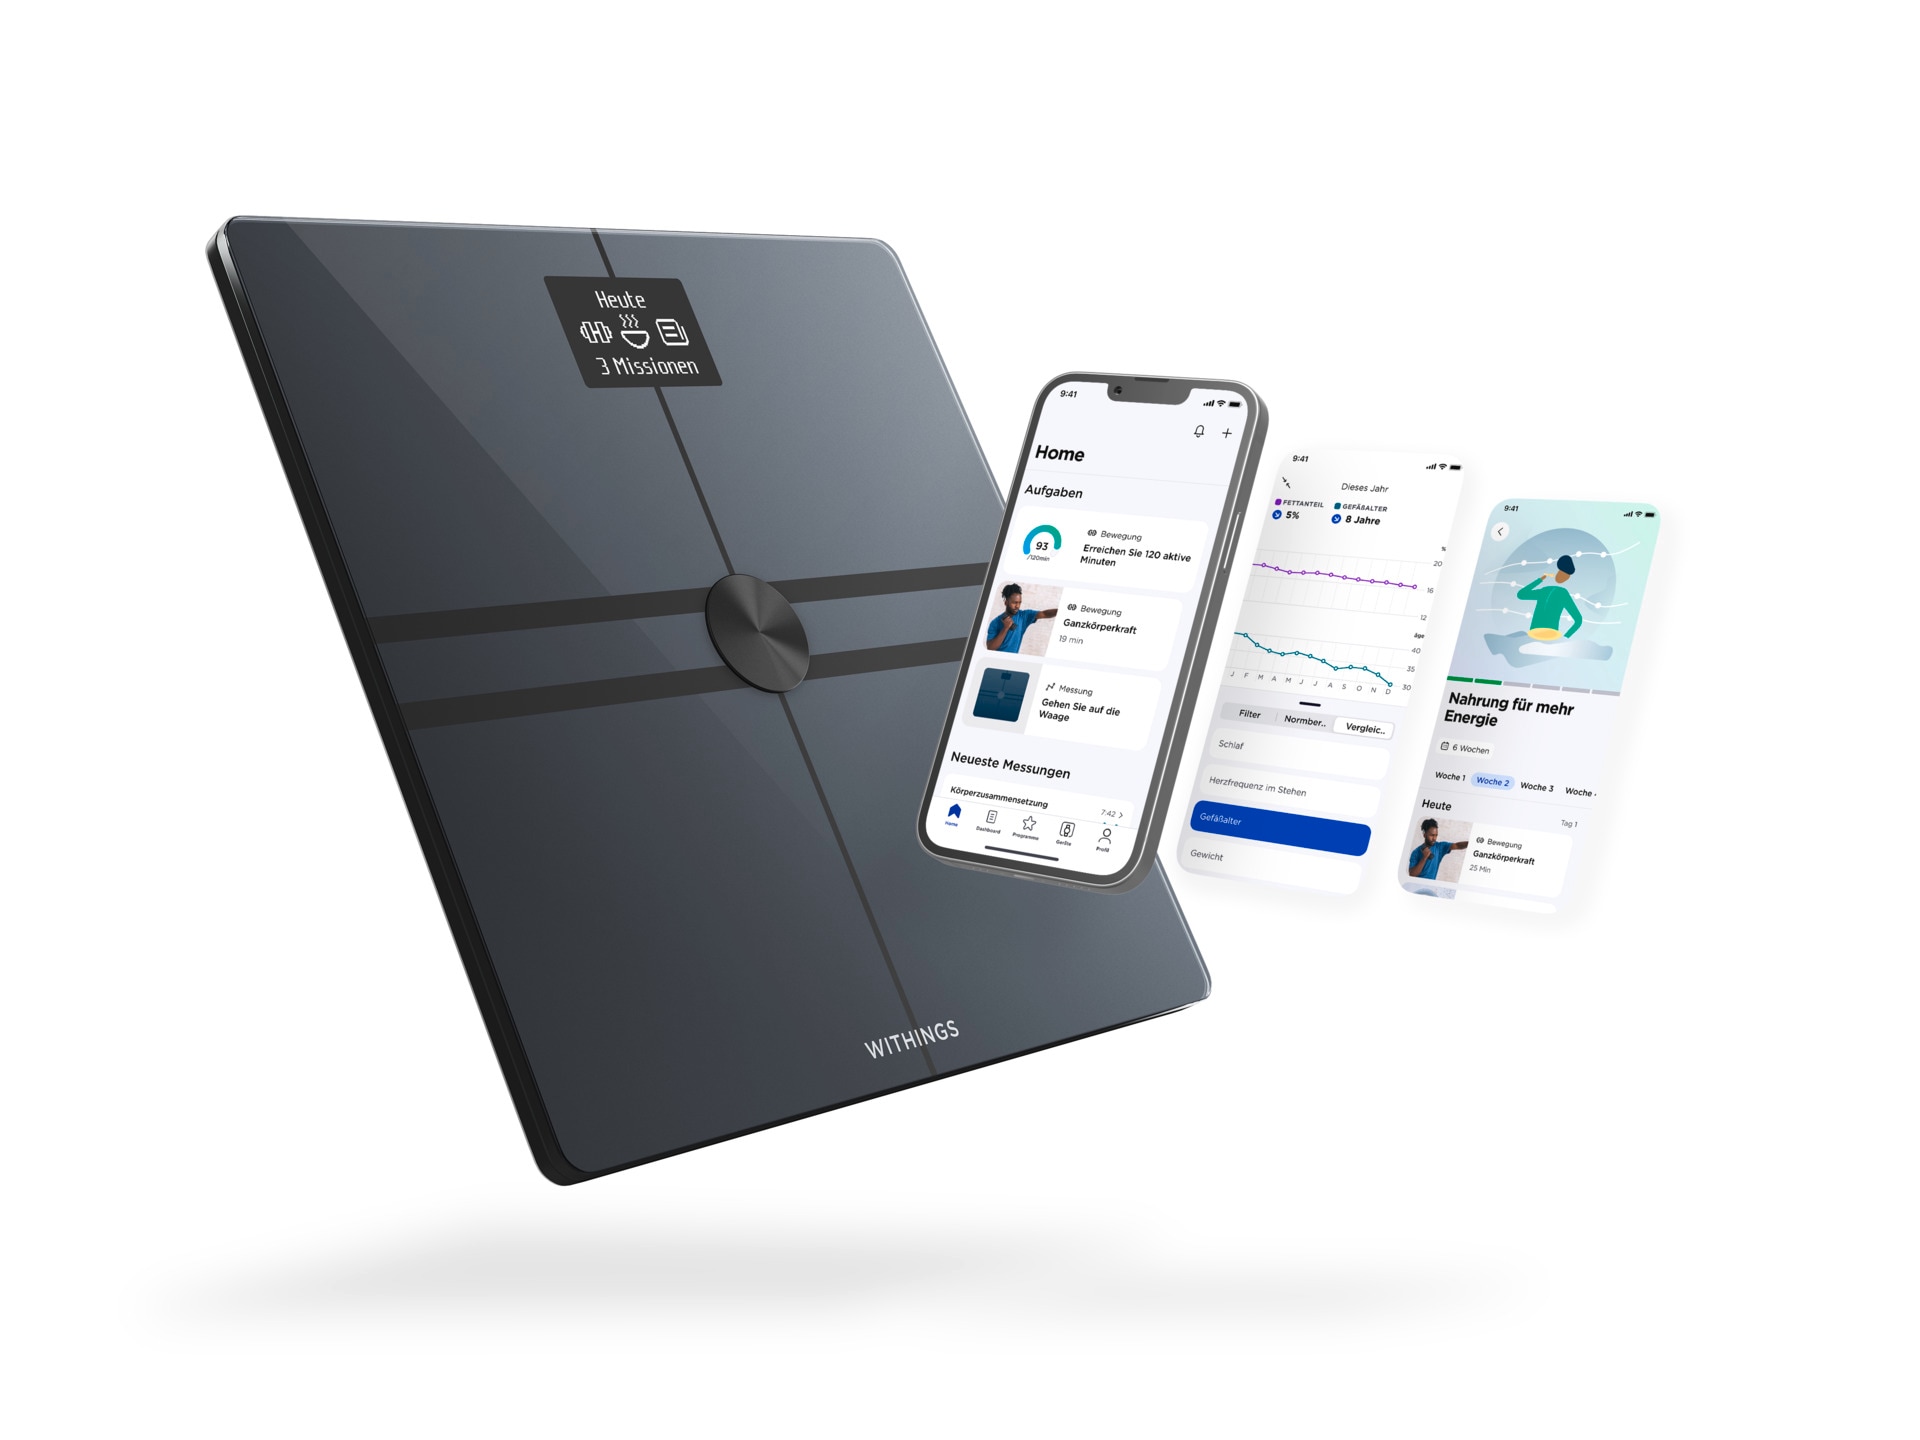 Withings Personenwaage »Body Comp«